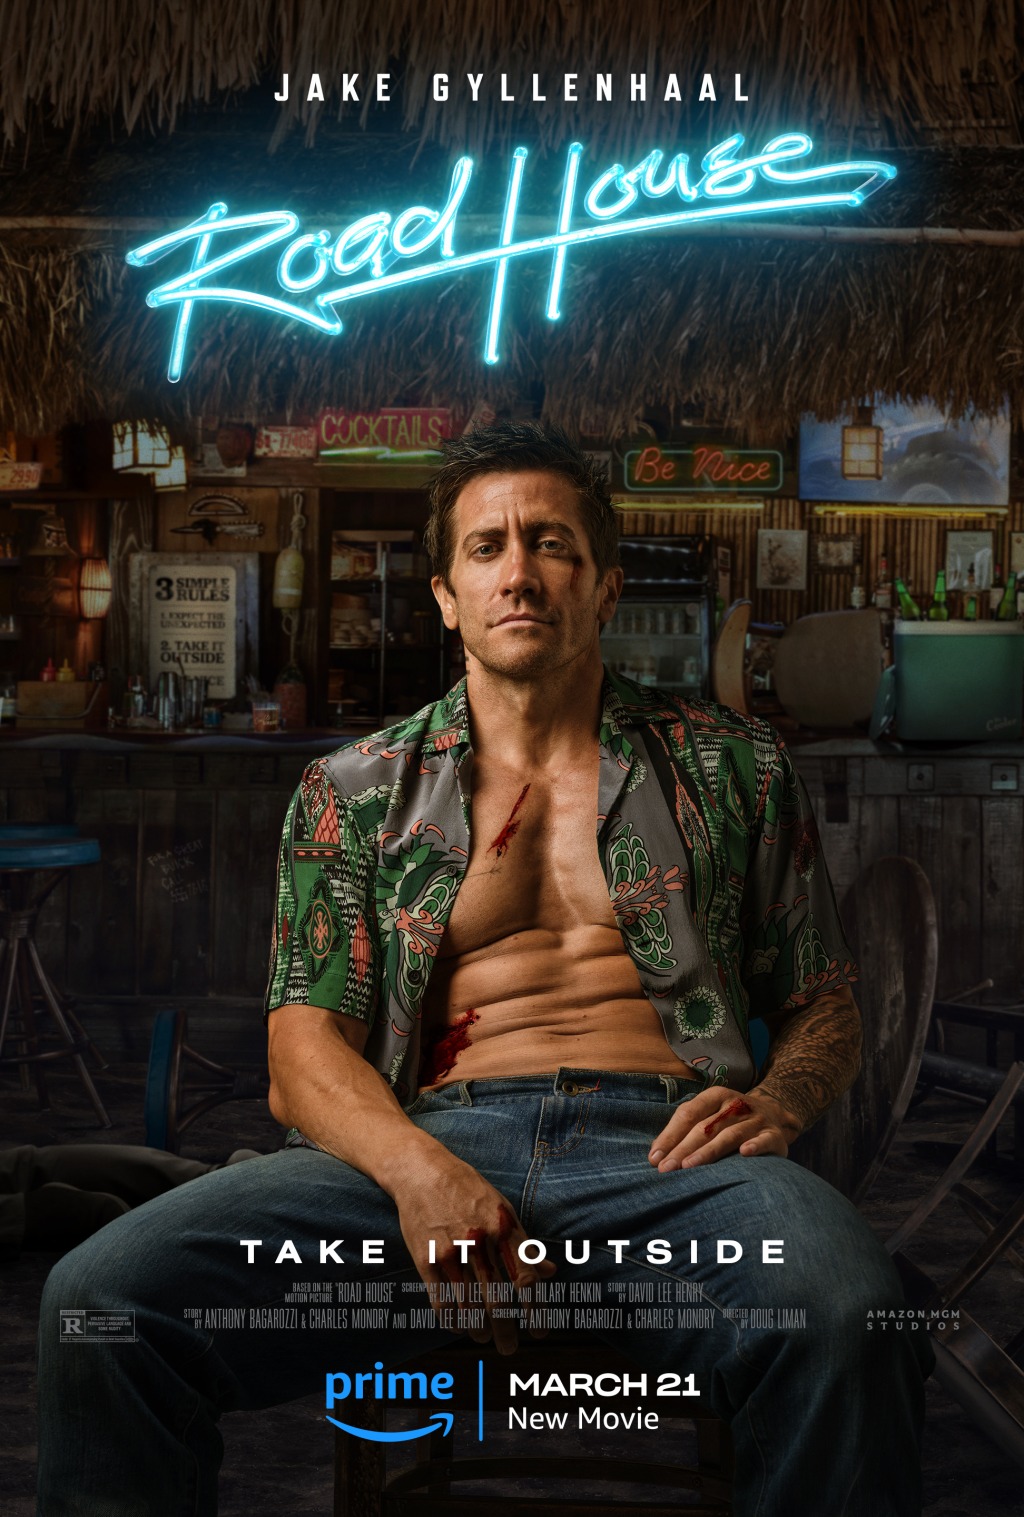 Road House Review — Highly entertaining, and offers its own punch